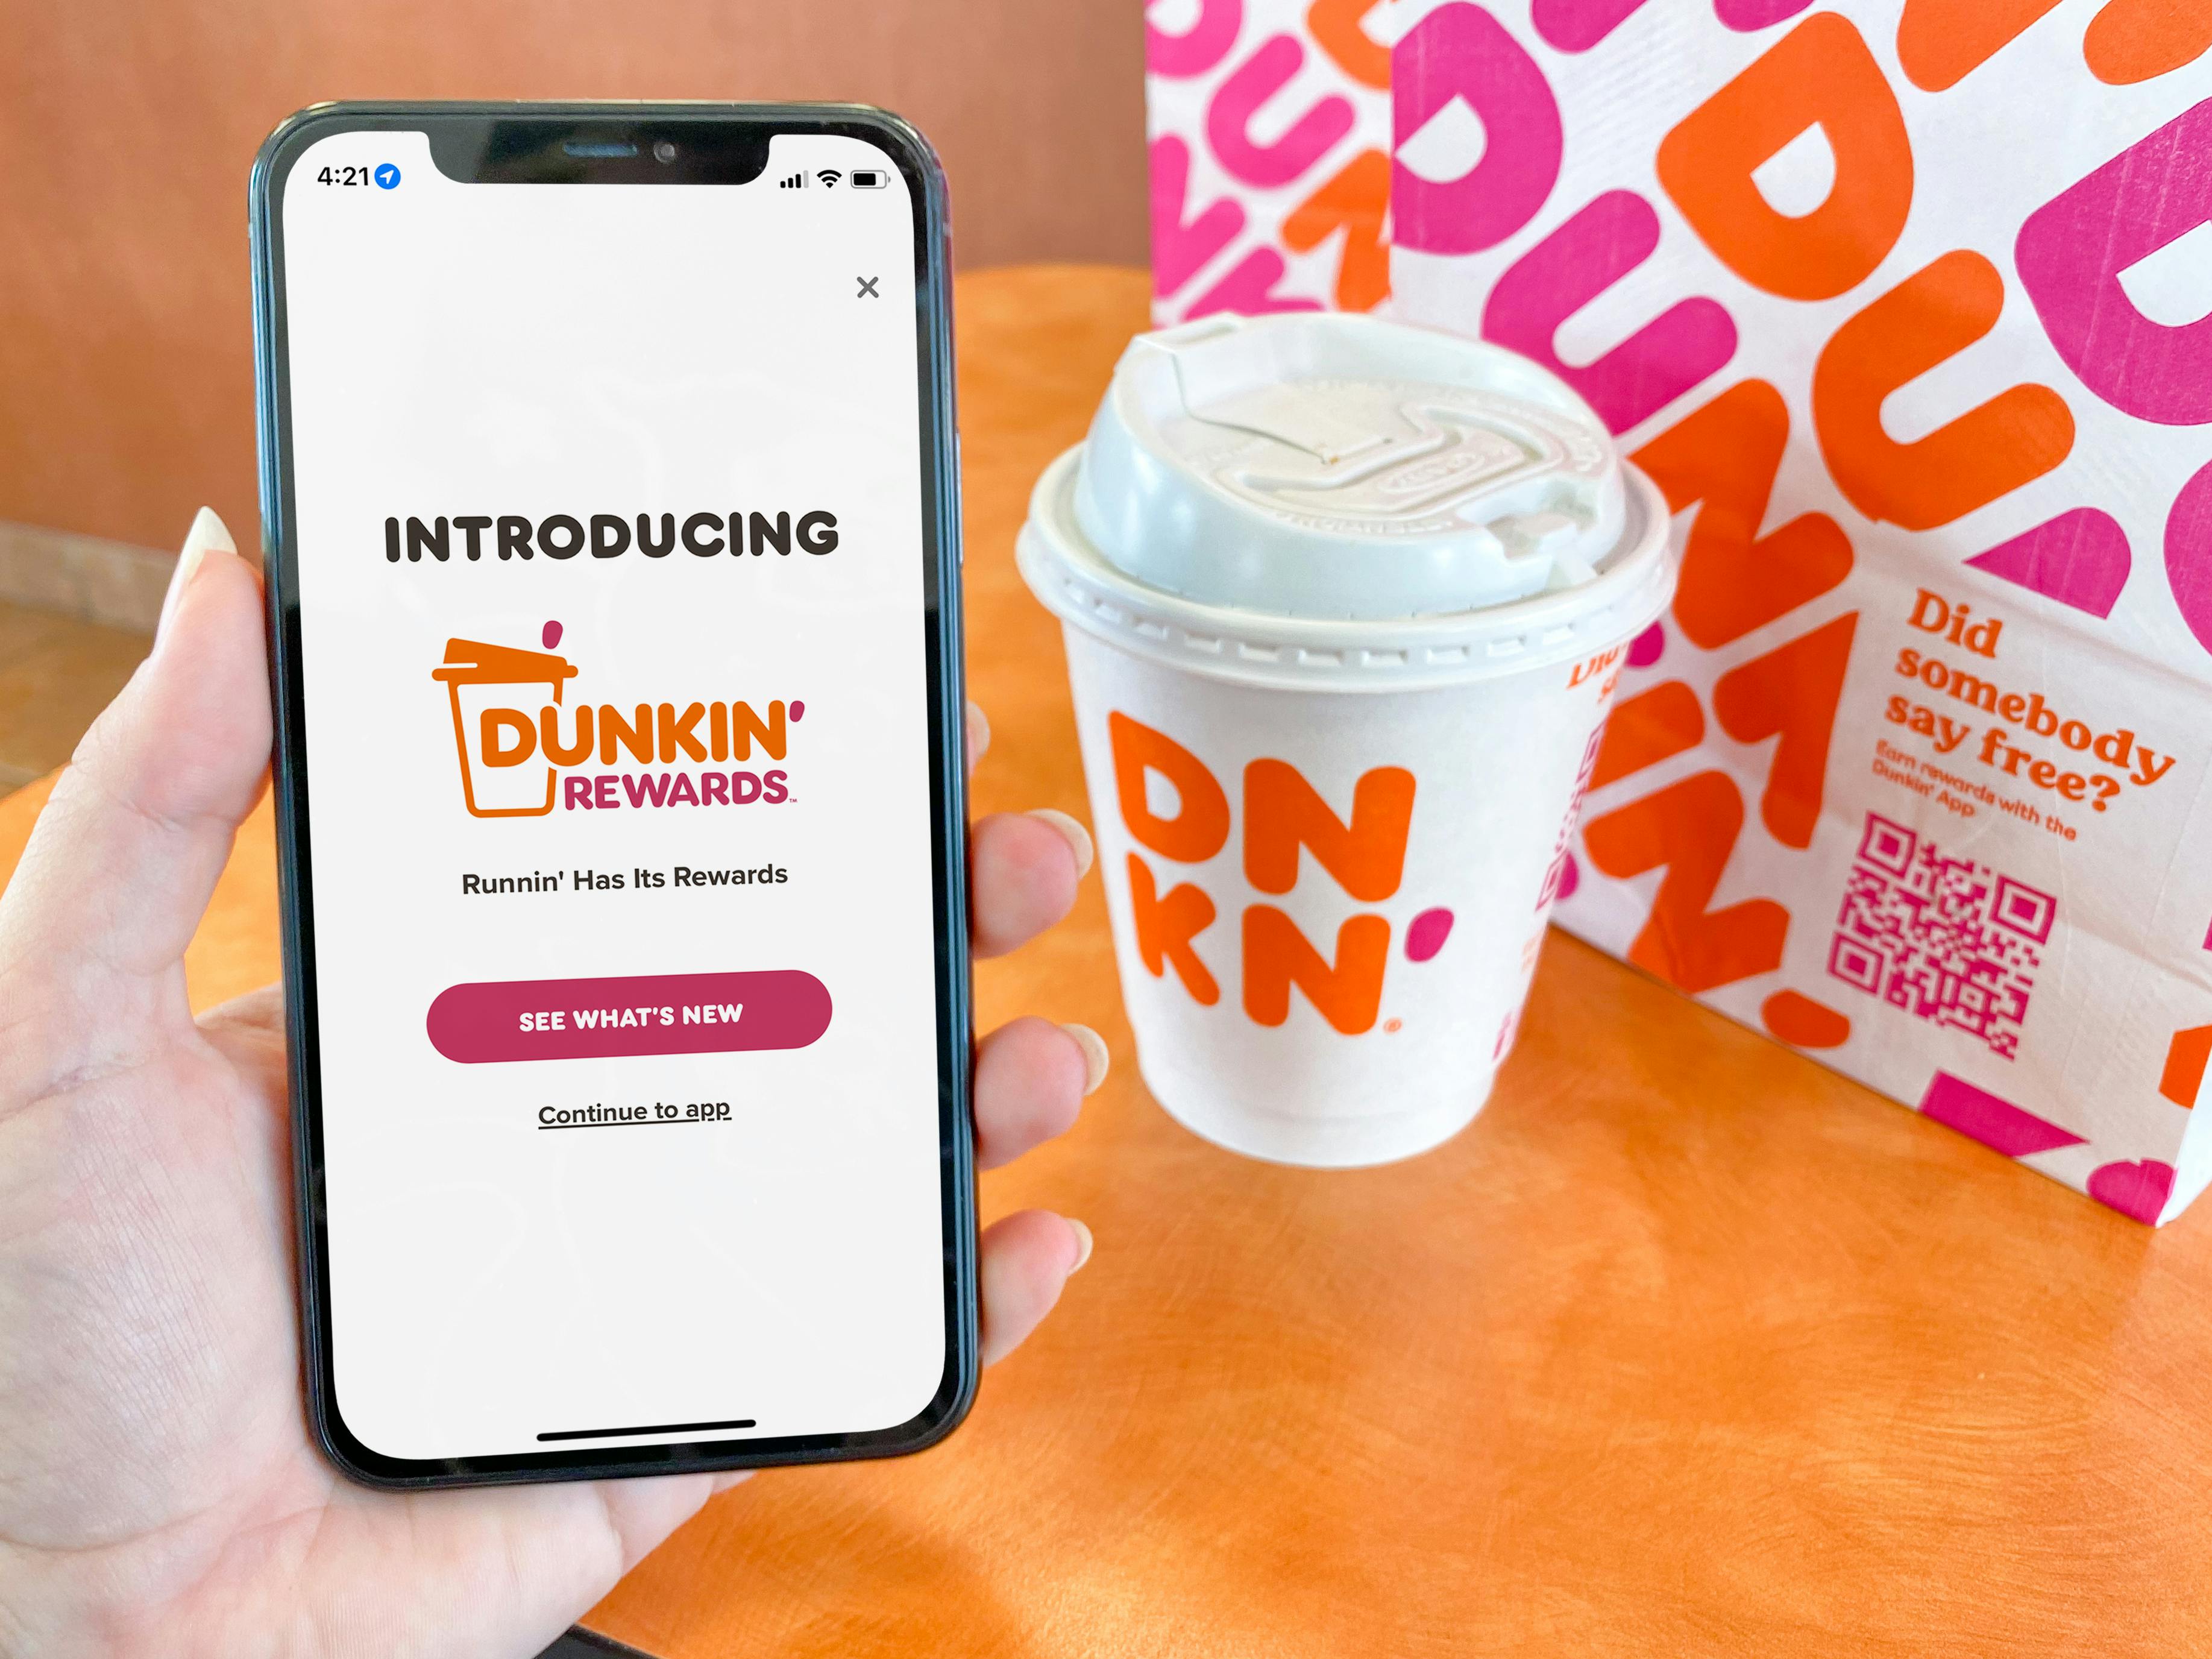 Get a Free Dunkin' Coffee With a Promo Code The Krazy Coupon Lady